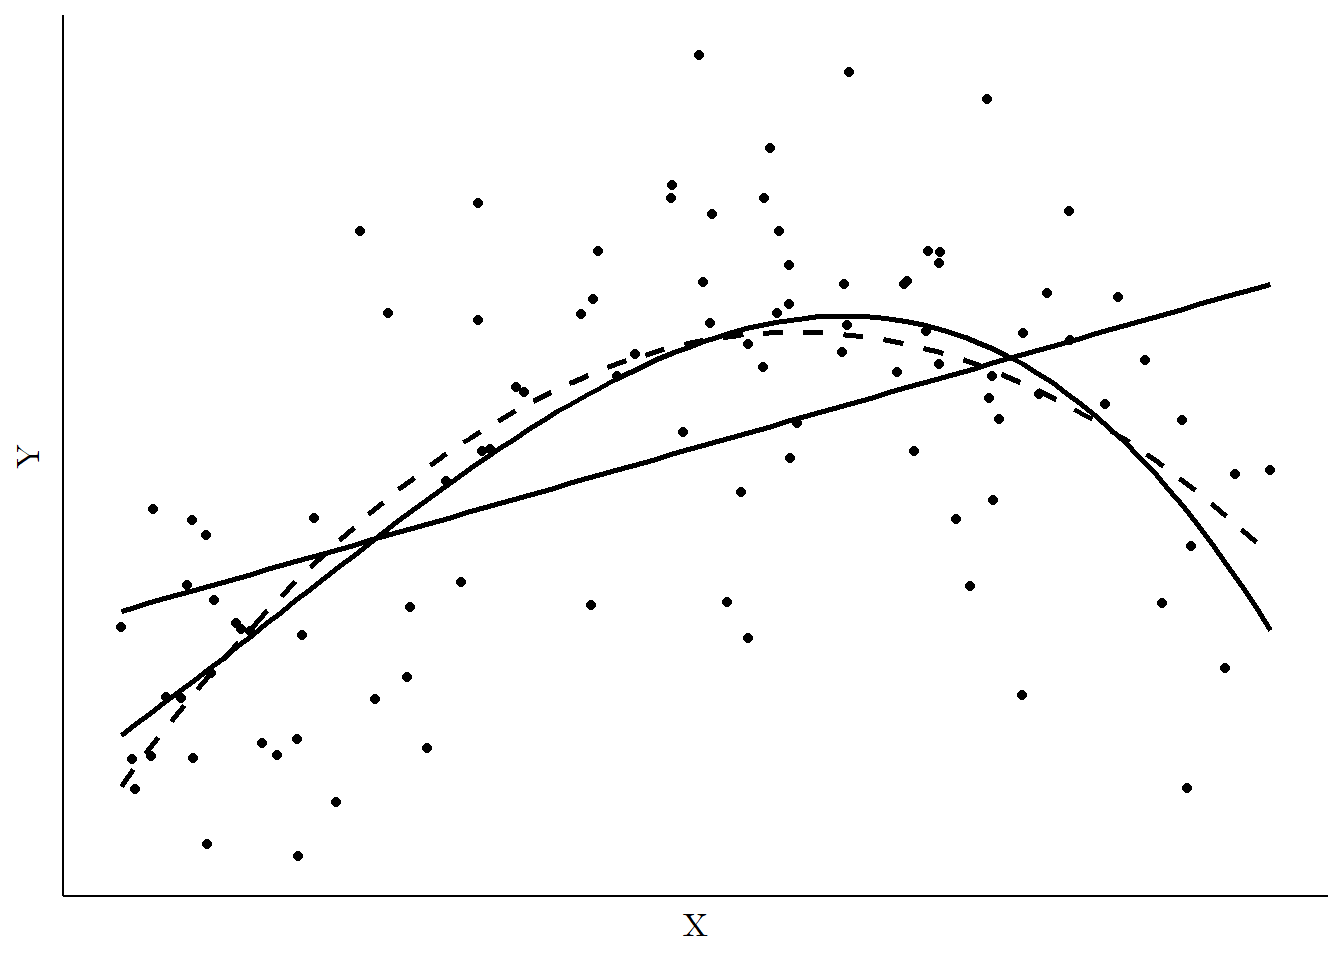 Graph showing the same data fit using a linear, second-order polynomial, and third-order polynomial OLS model